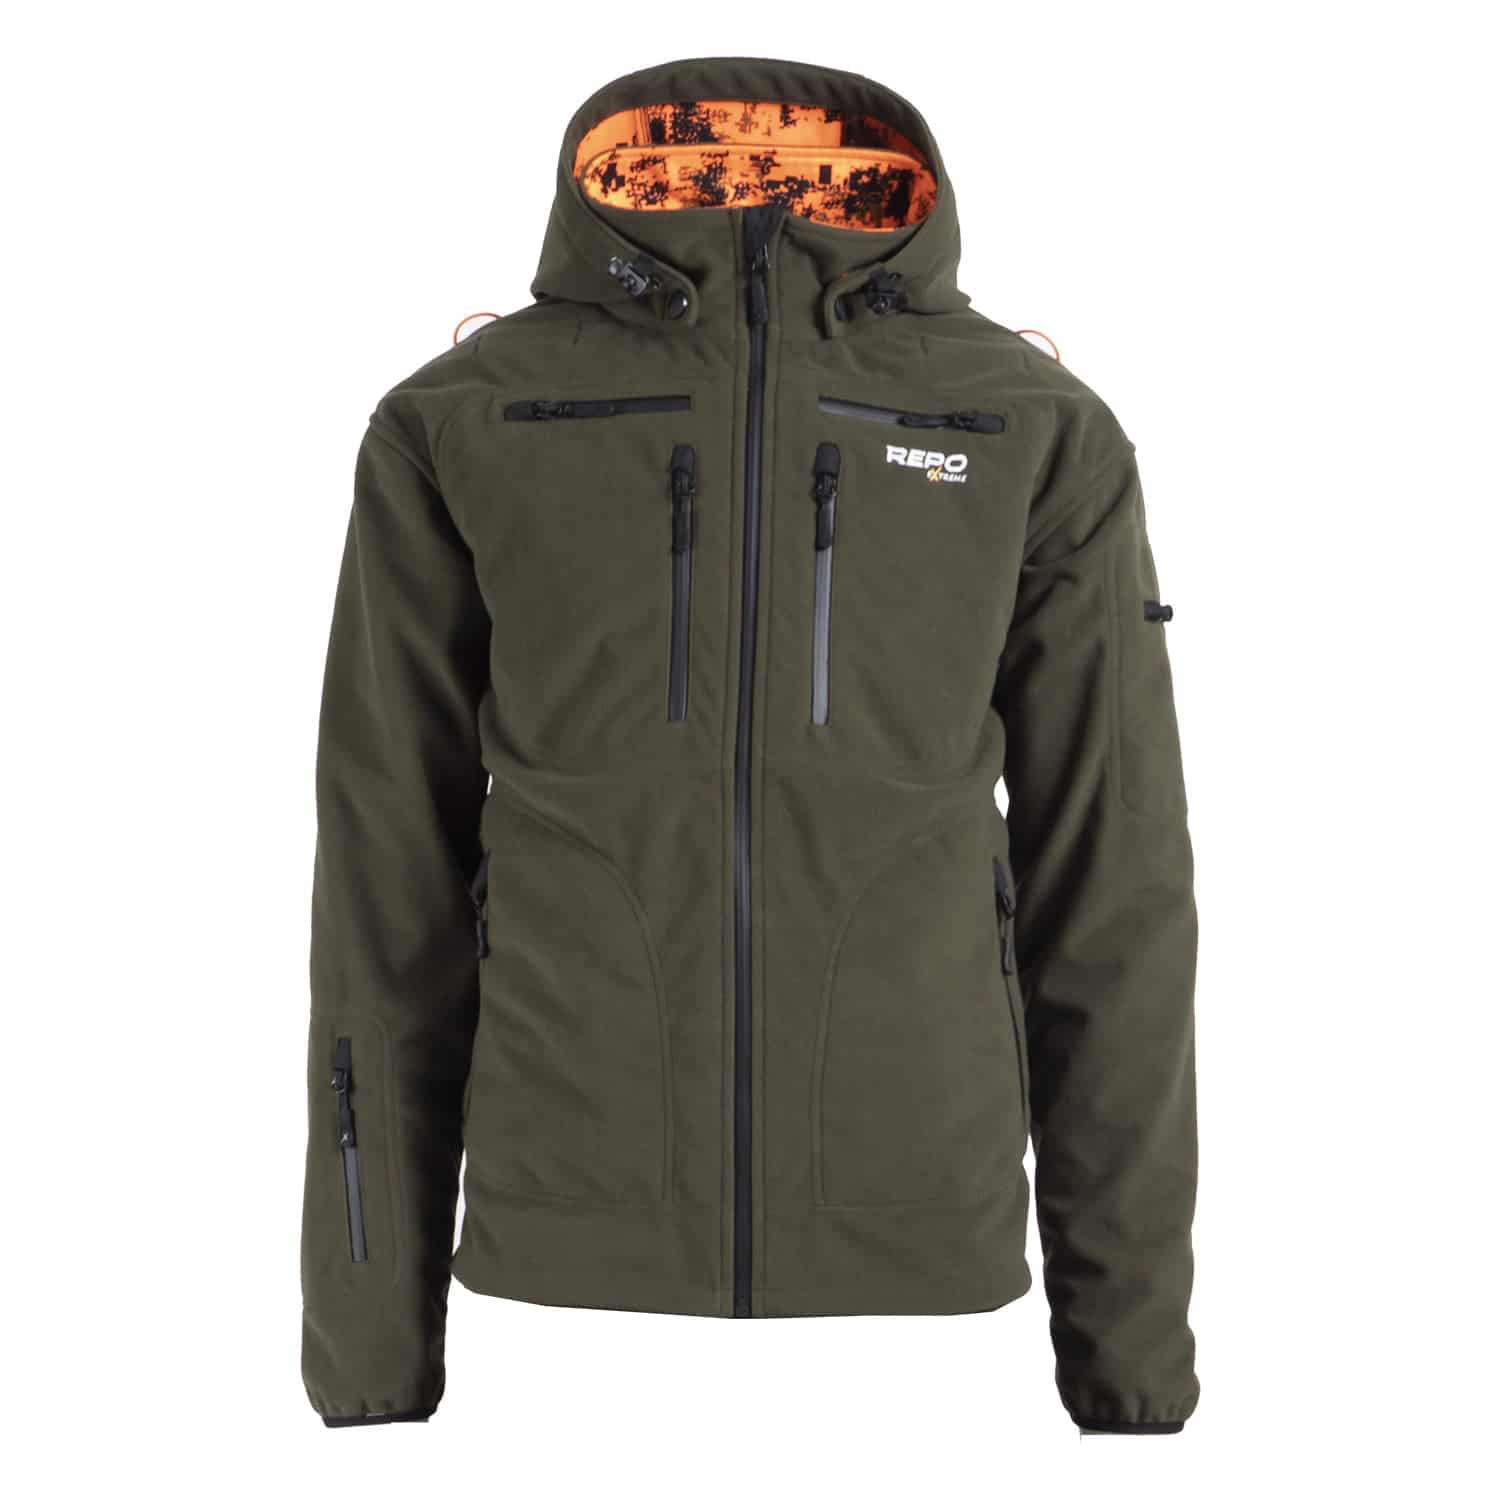 Karelia Forest Green hunting jacket shown from the front